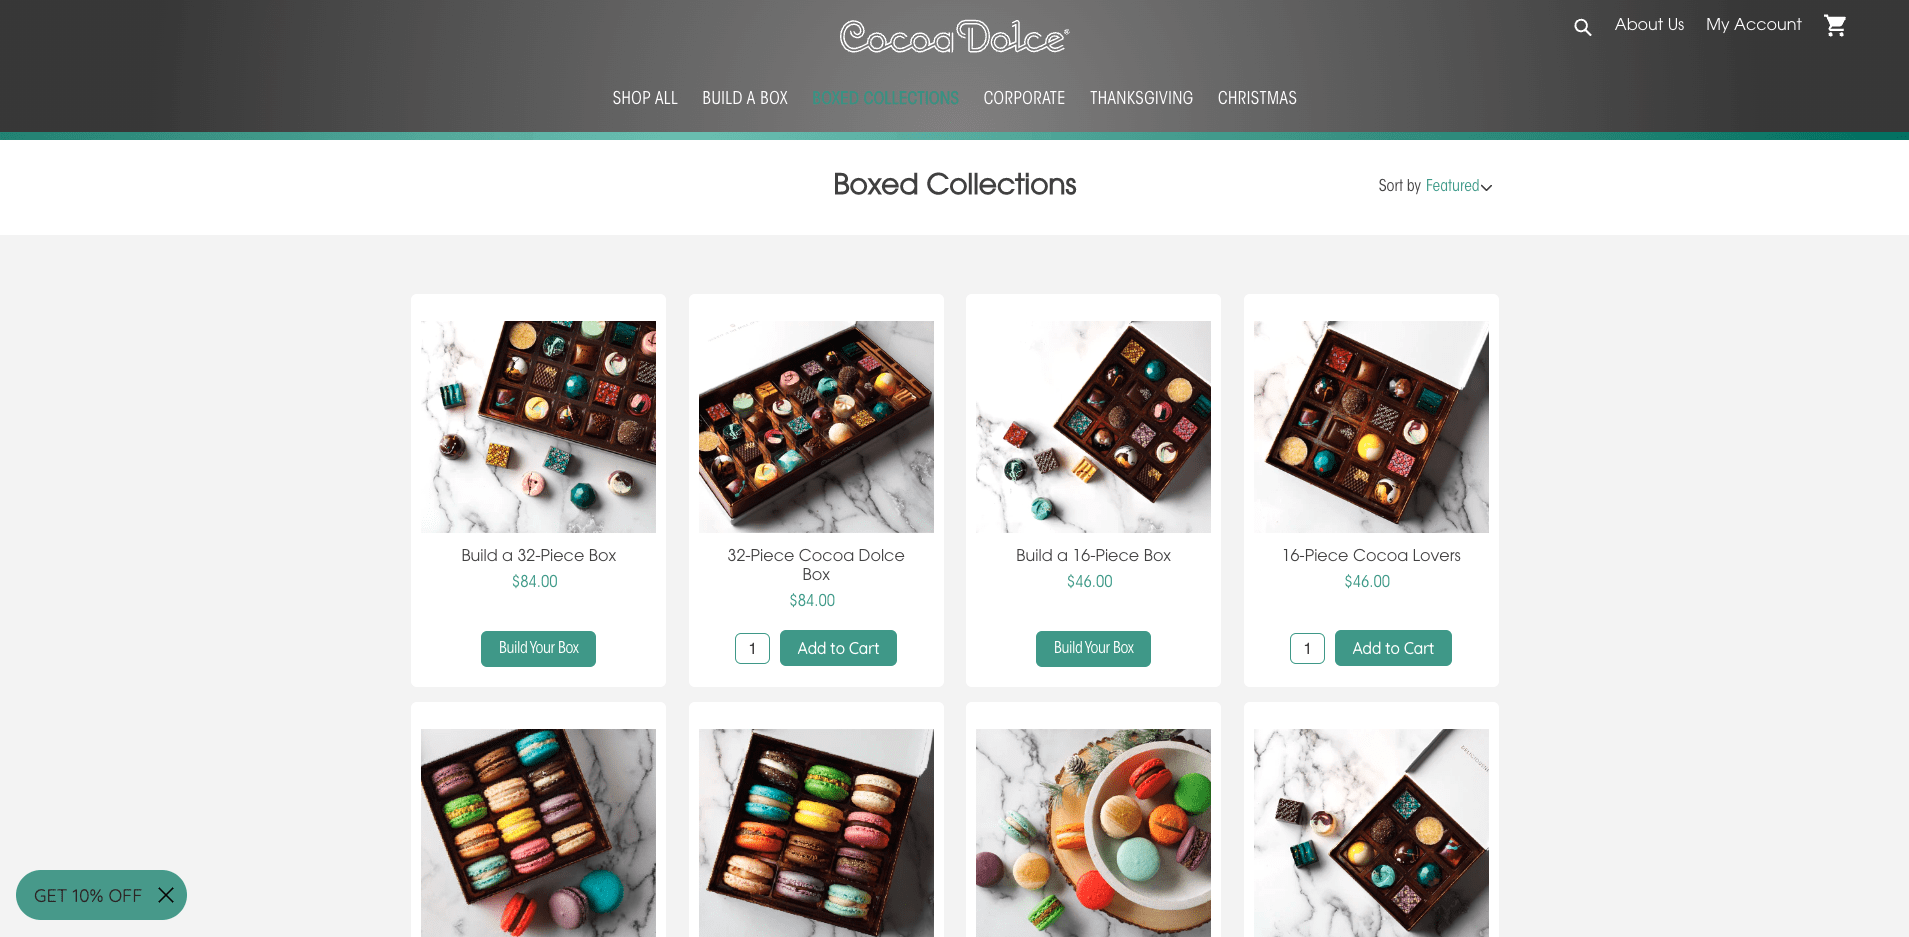 Coco Dolce Boxed Collections holiday gift guide